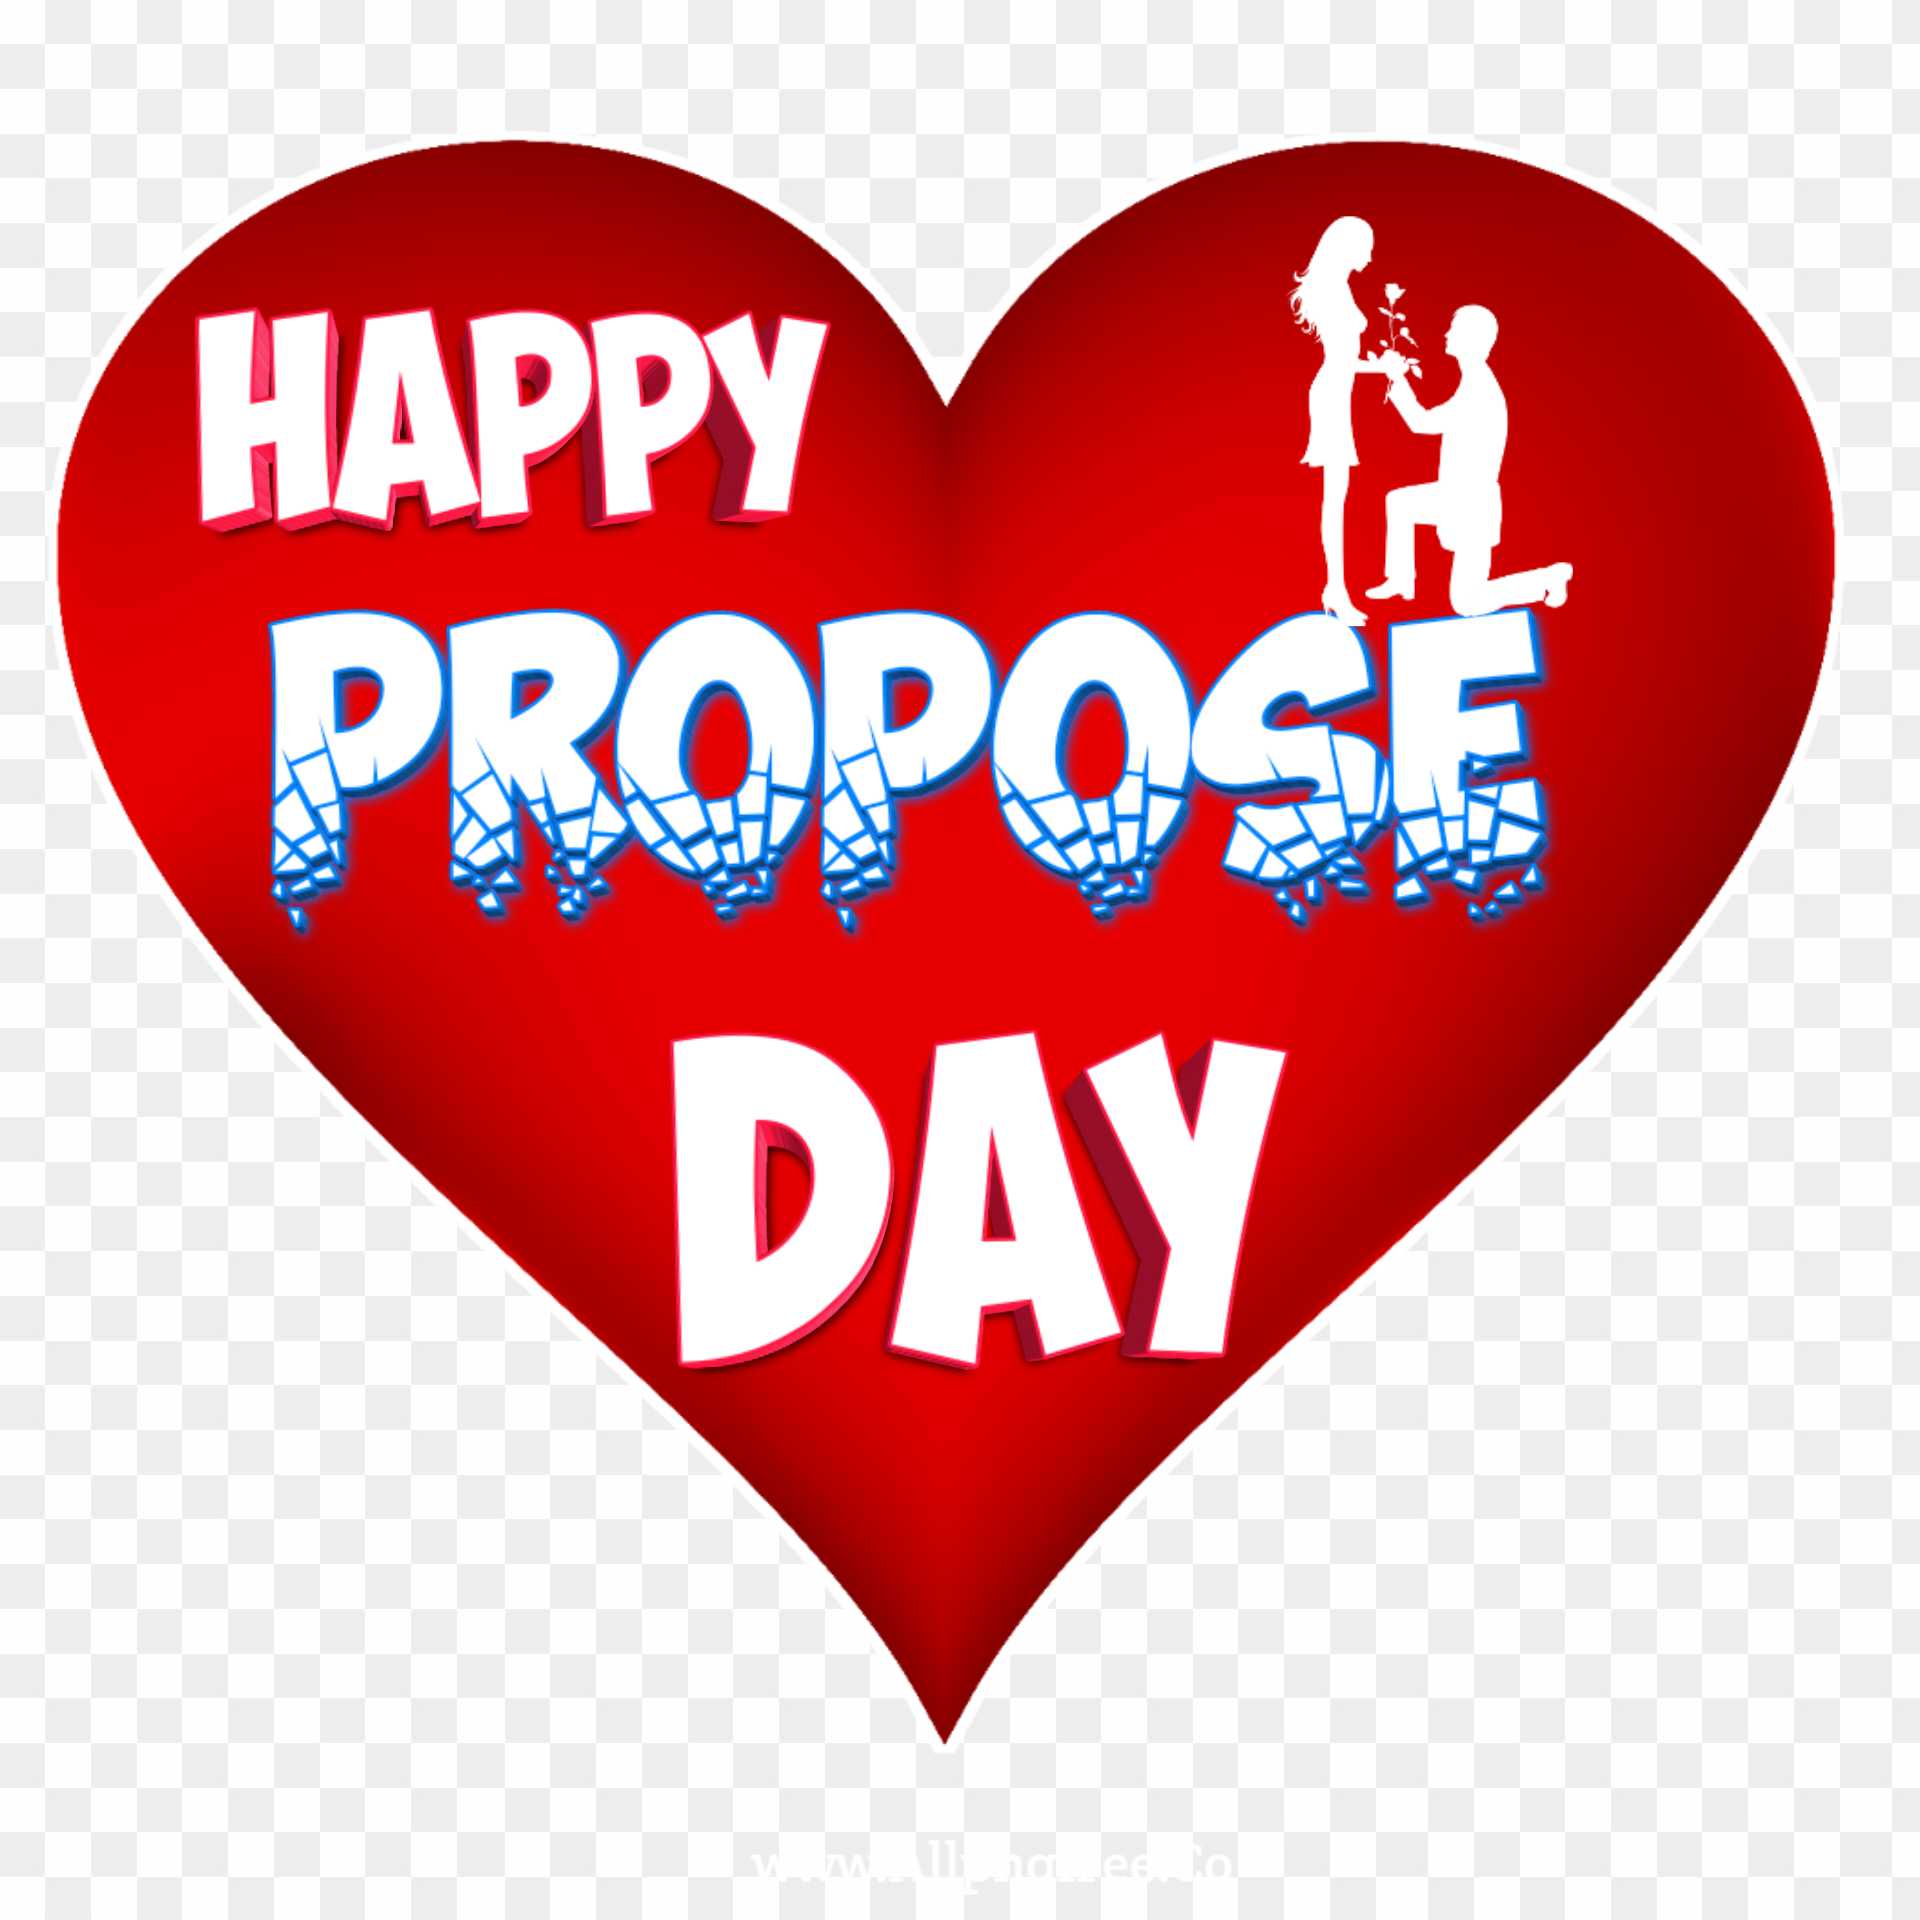 Propose day PNG transparent images